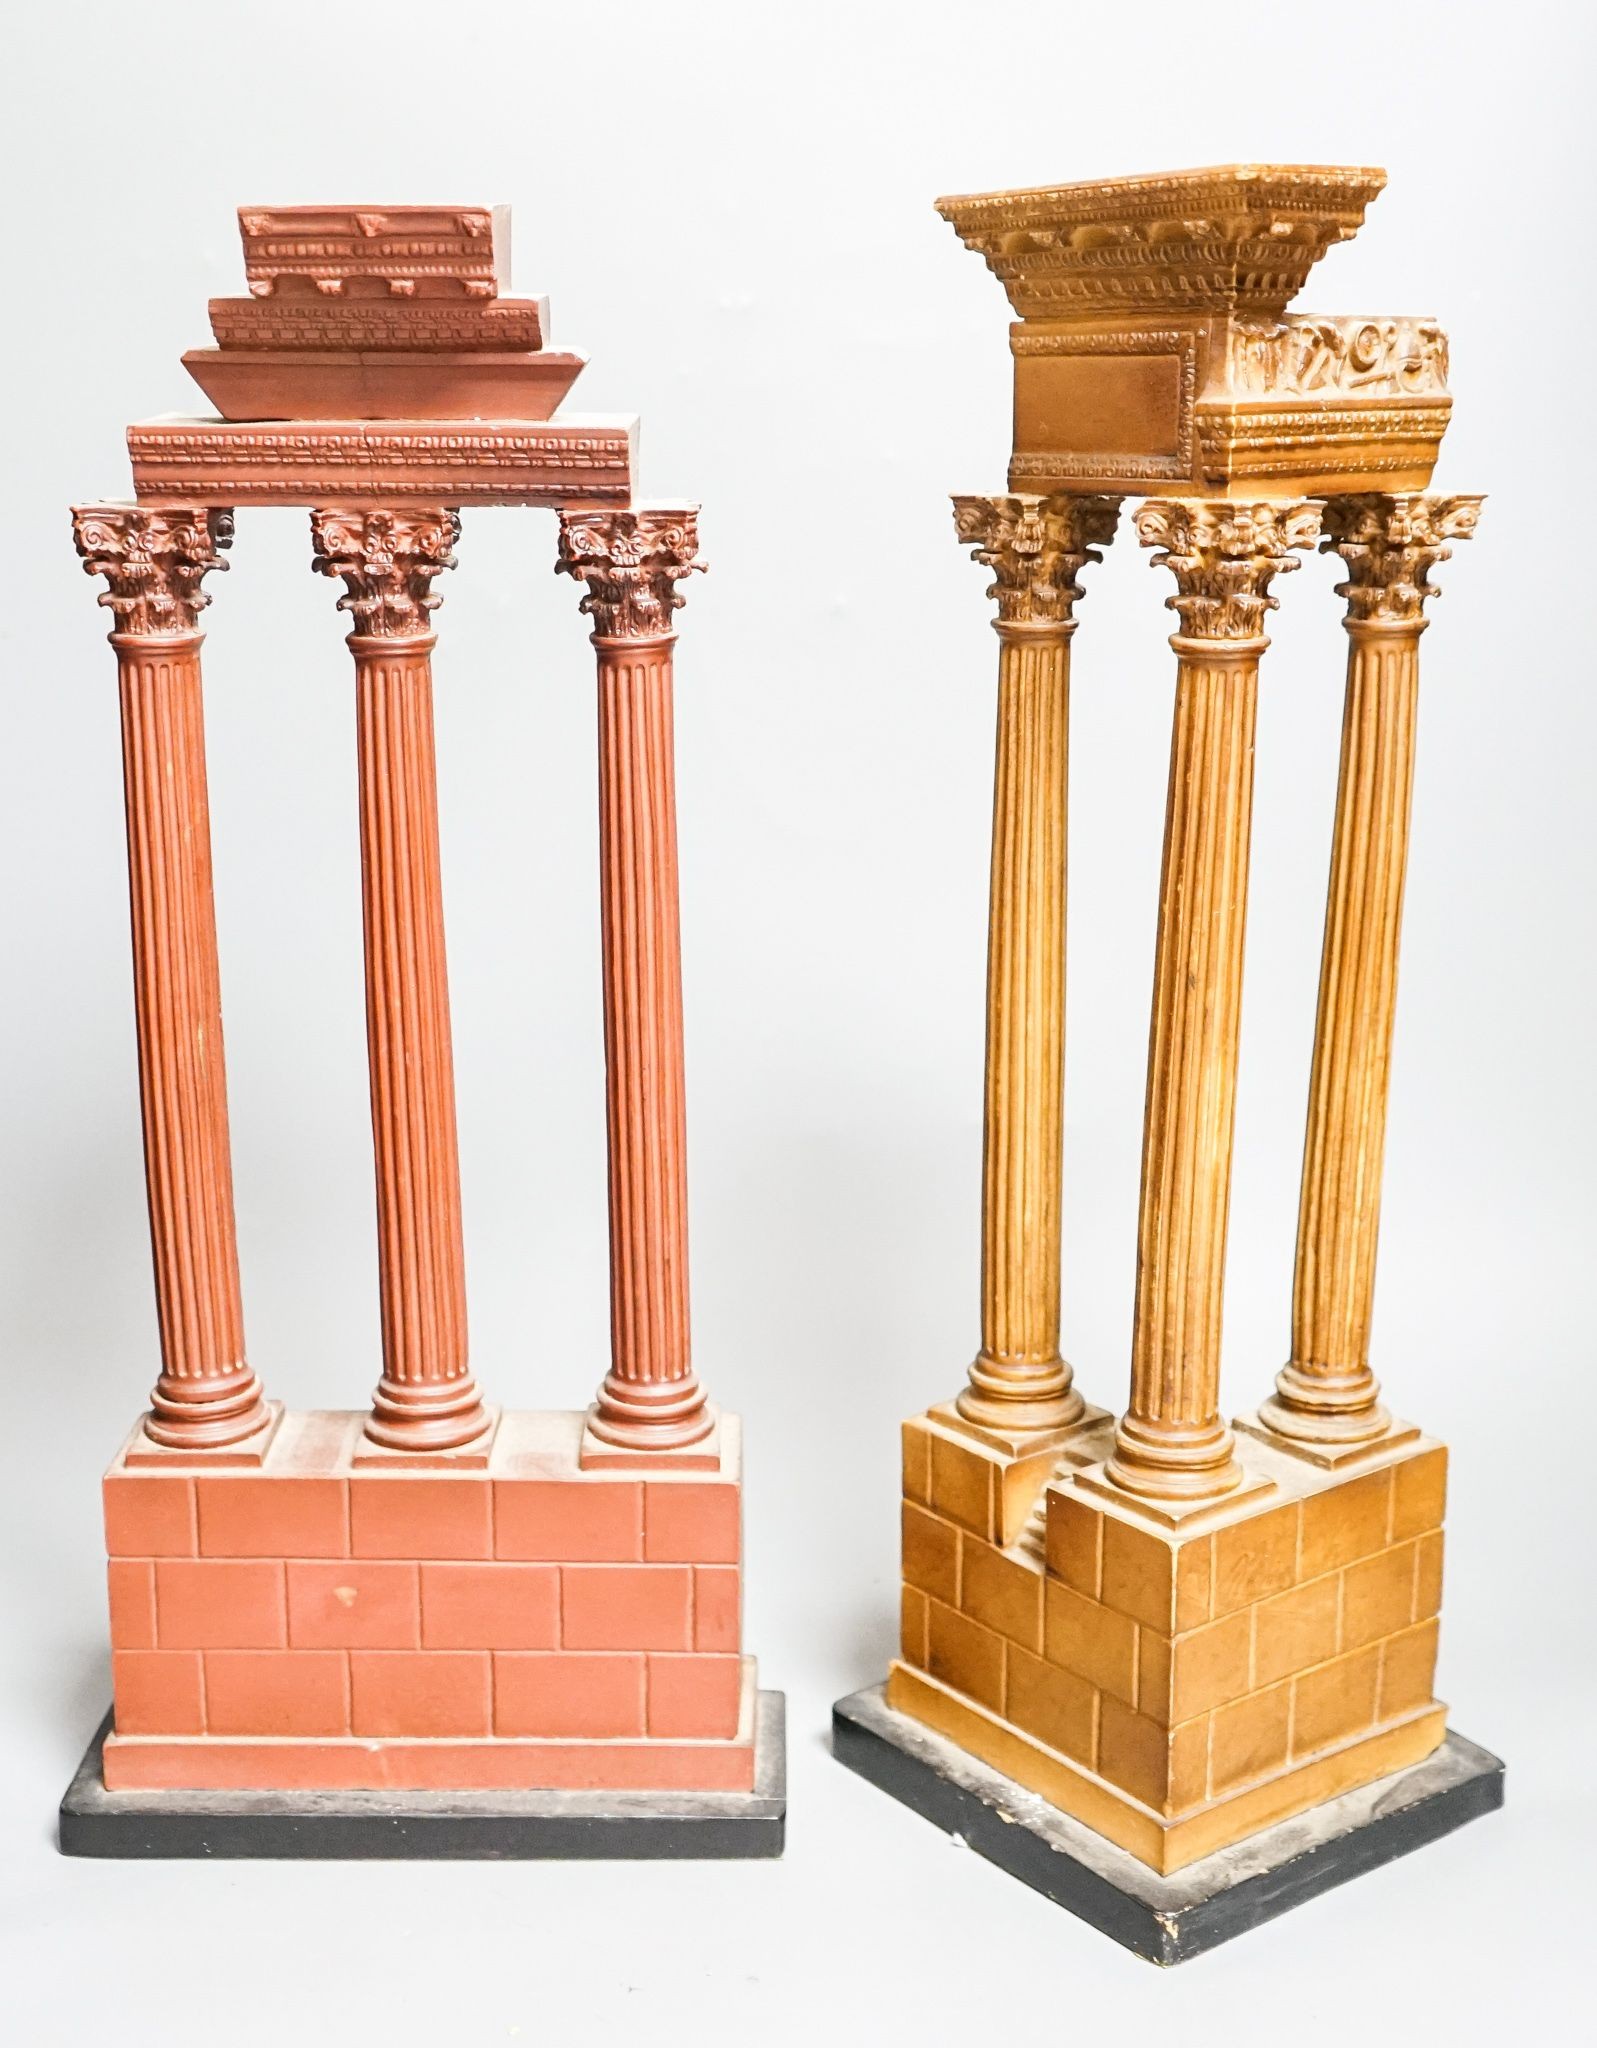 A reproduction resin model of temple of Castor and Pollux and another reproduction temple model (2) 44cm